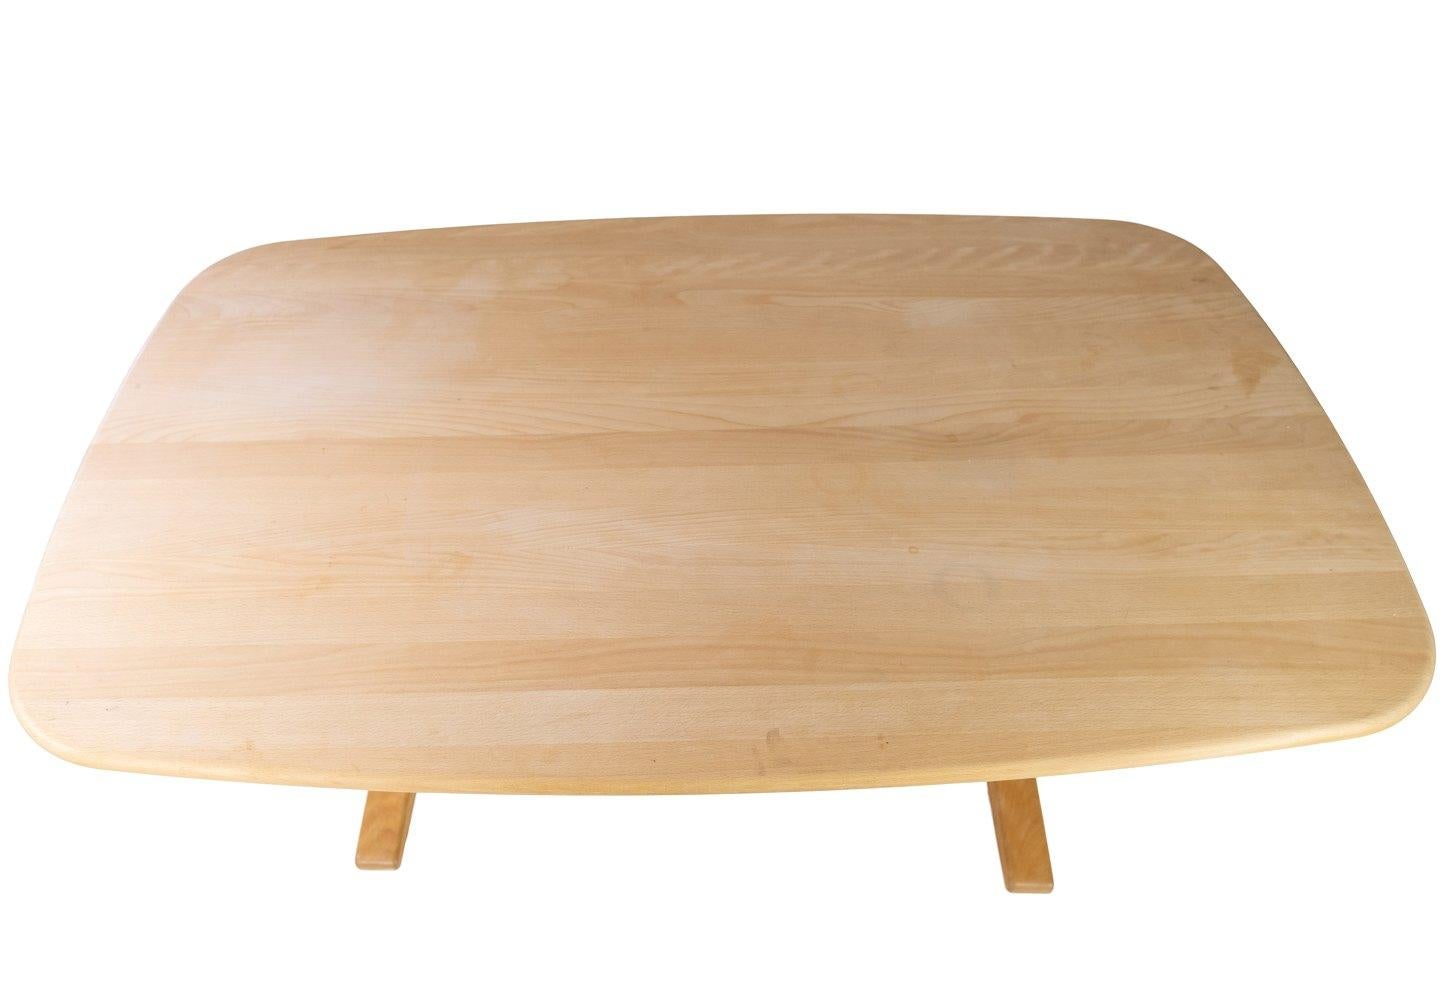 Coffee Table in Beech of Danish Design Manufactured by Skovby Furniture Factory  2